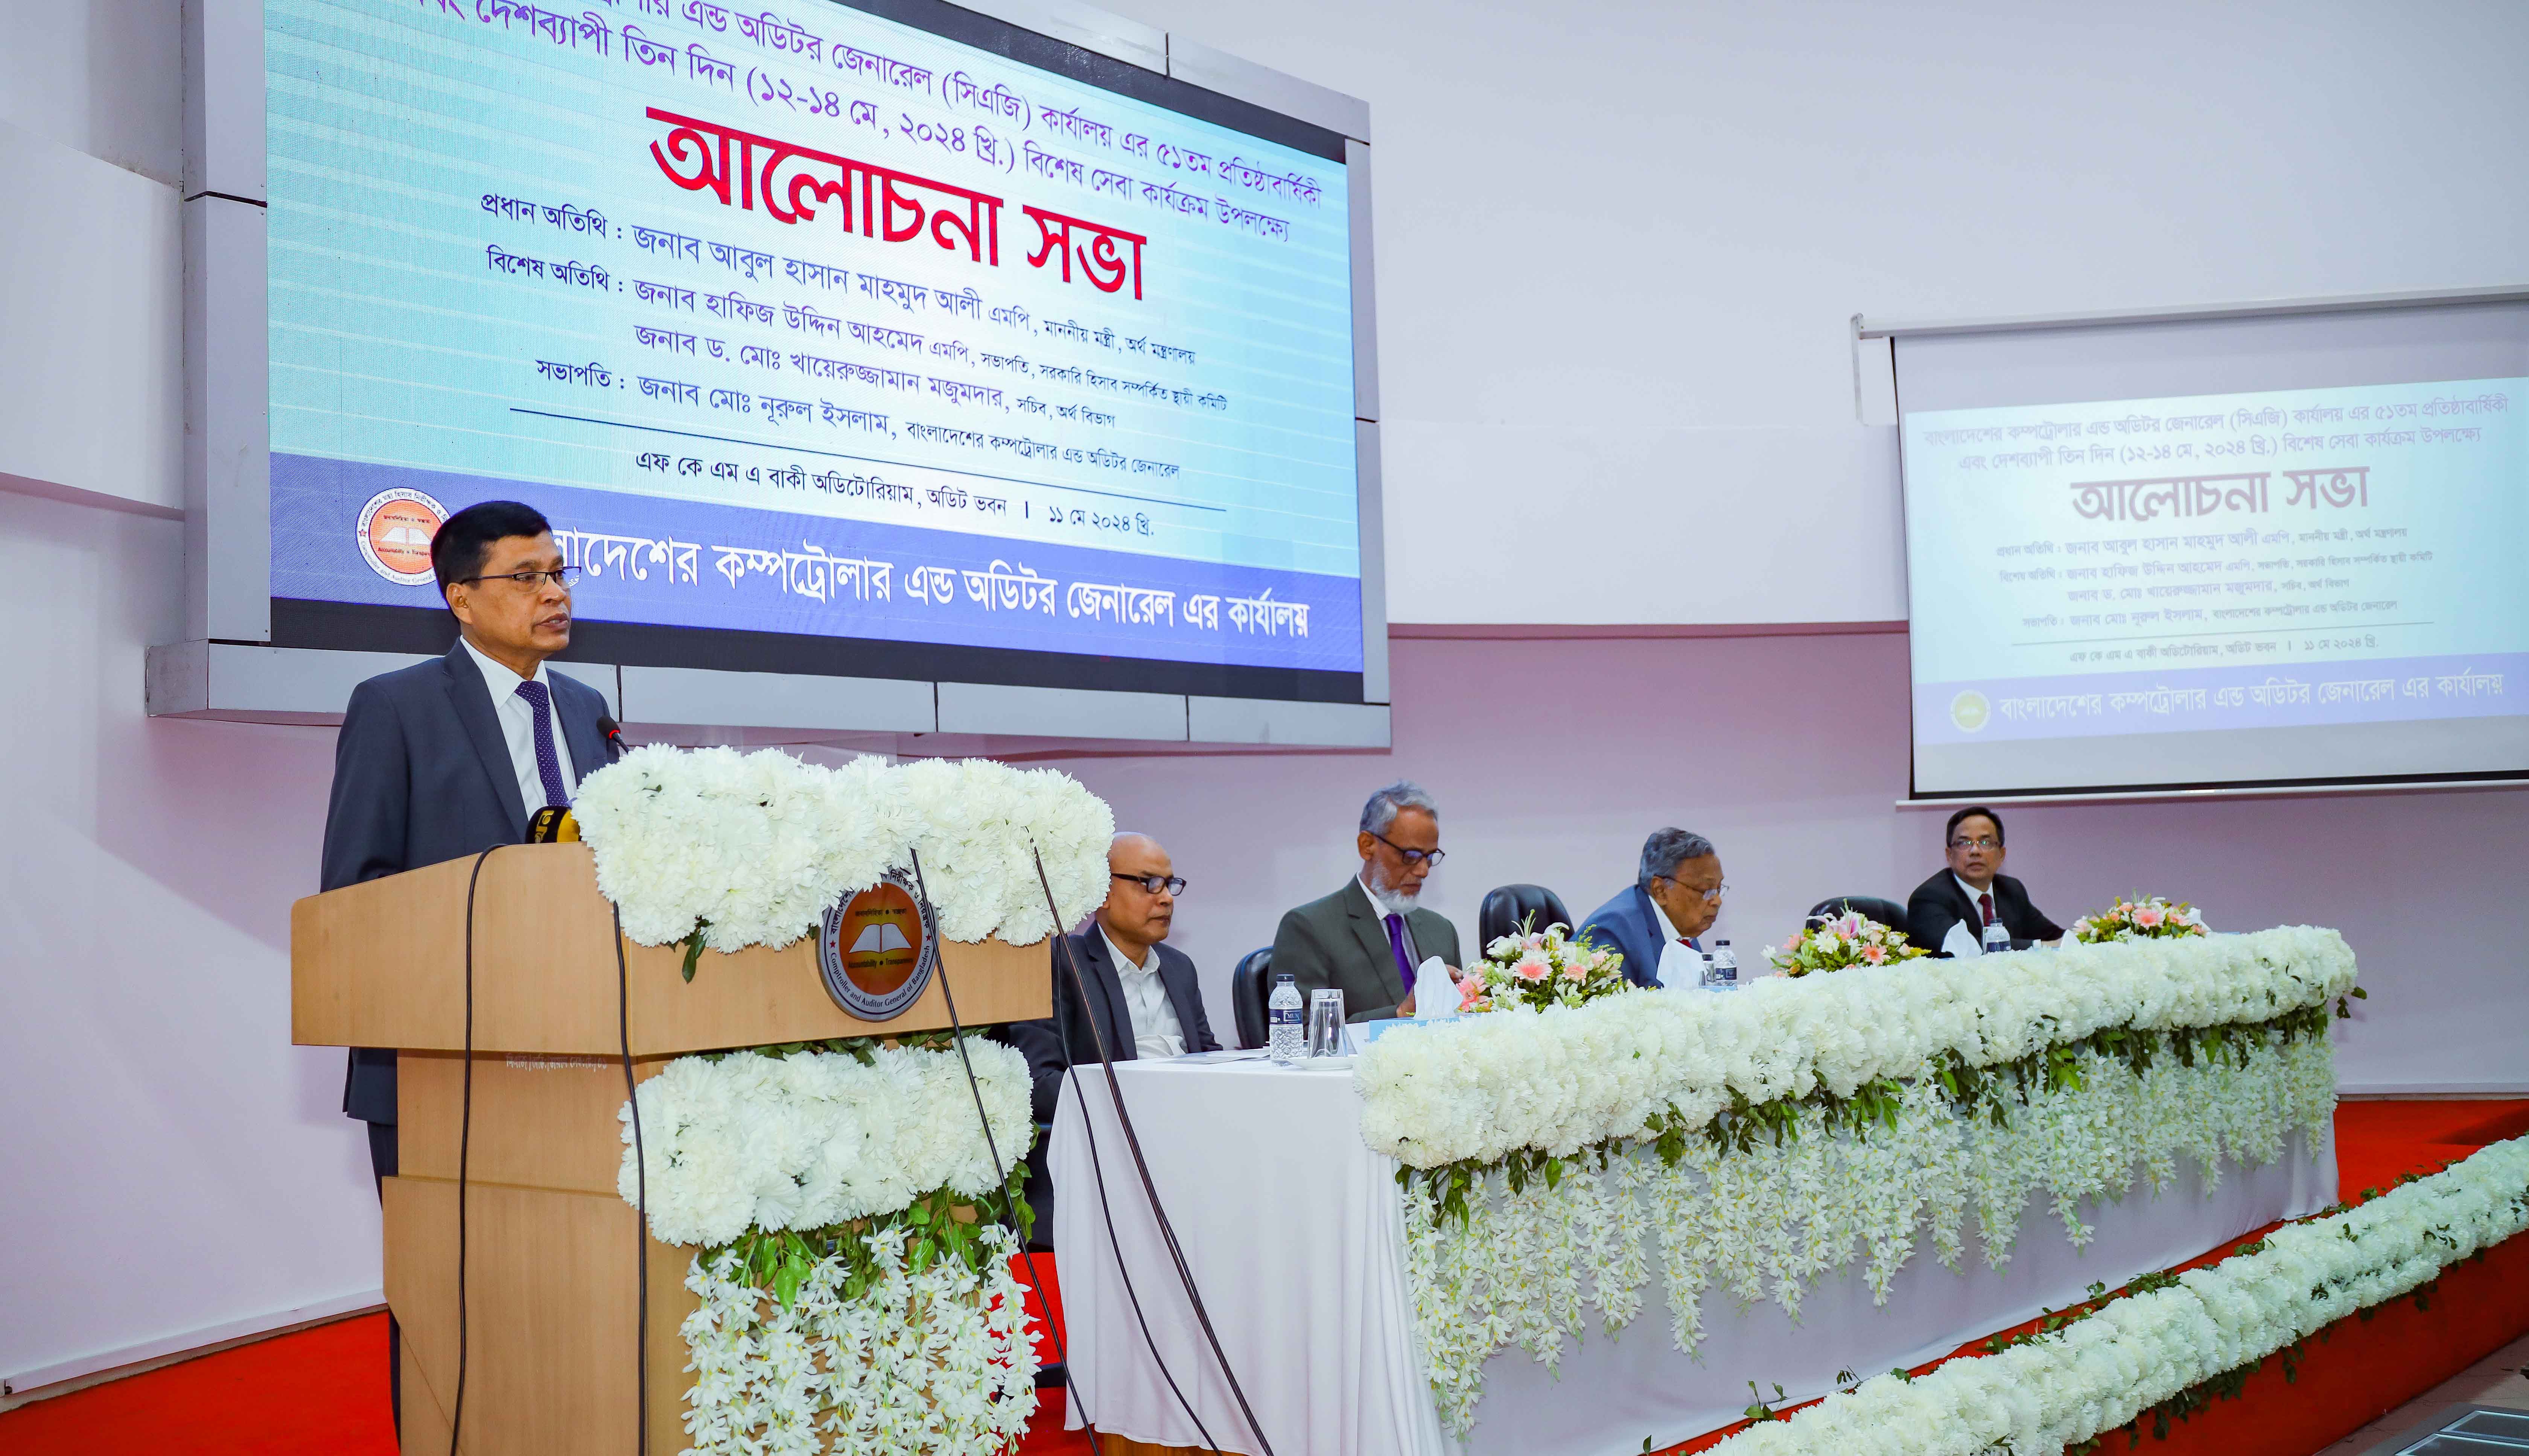 Honorable Comptroller and Auditor General of Bangladesh Md. Nurul Islam delivering his speech on the occasion of the 51st anniversary of OCAG